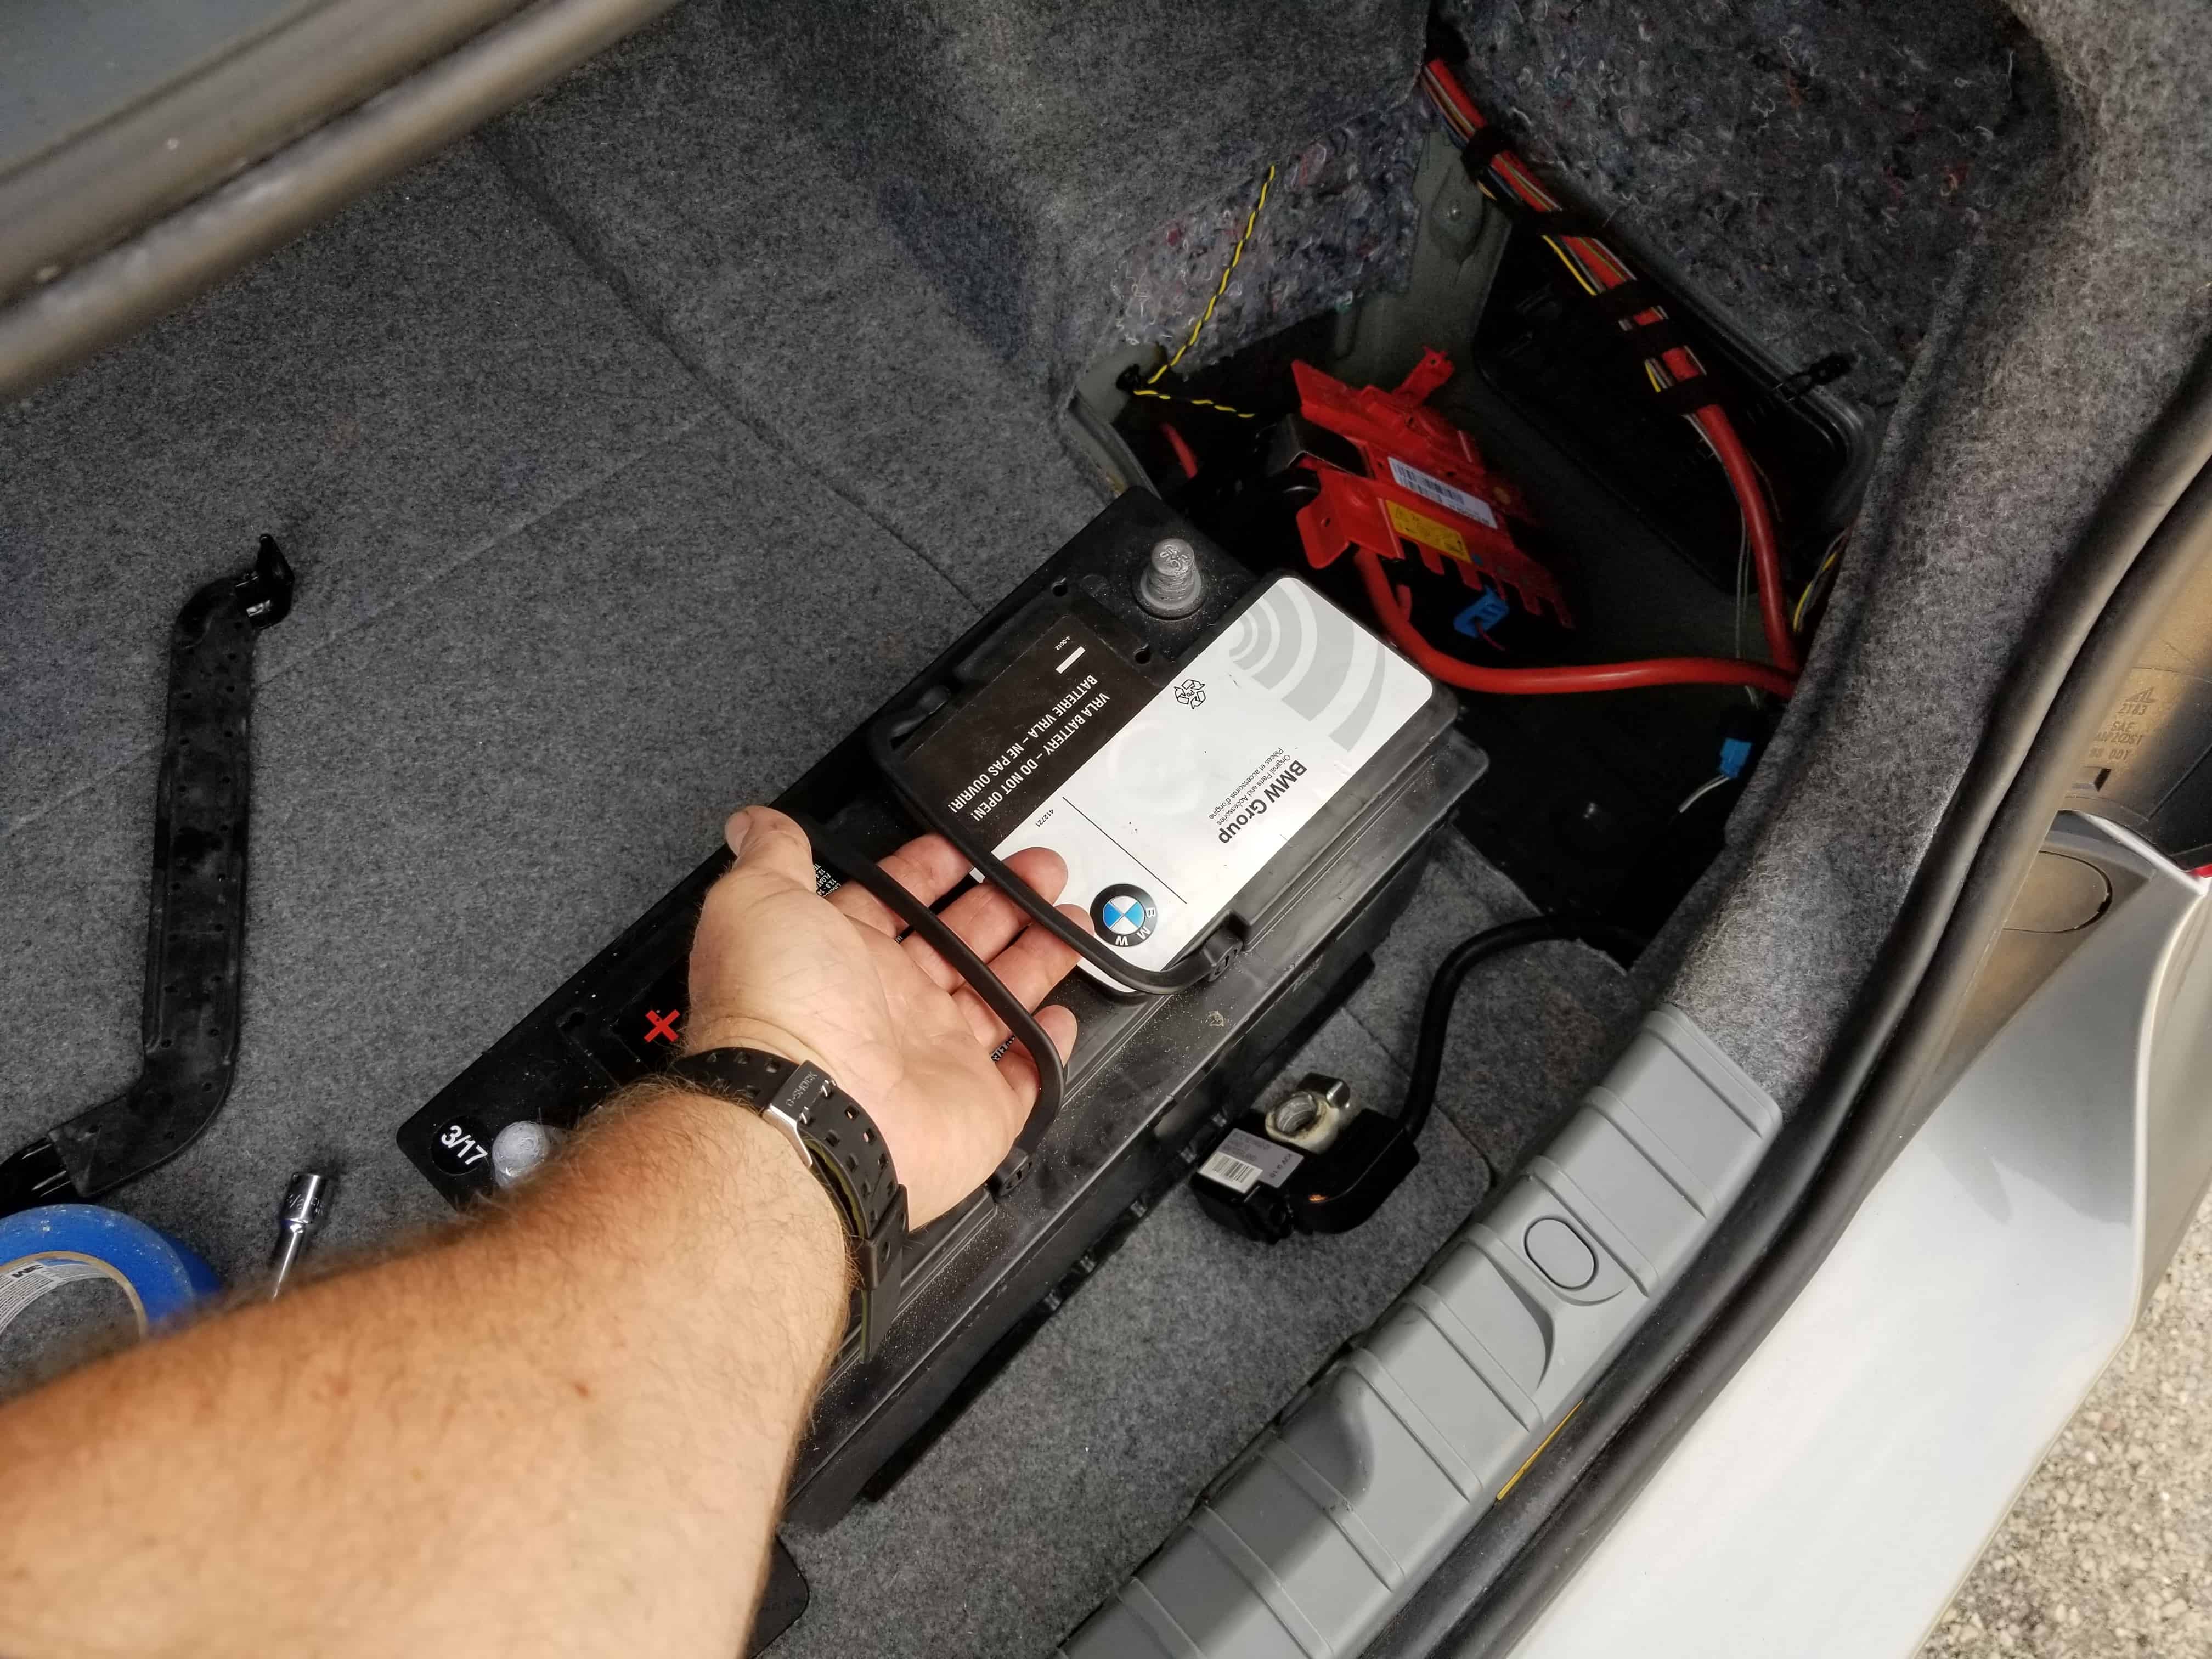 bmw e90 battery replacement - Grasp the battery and remove it from the trunk